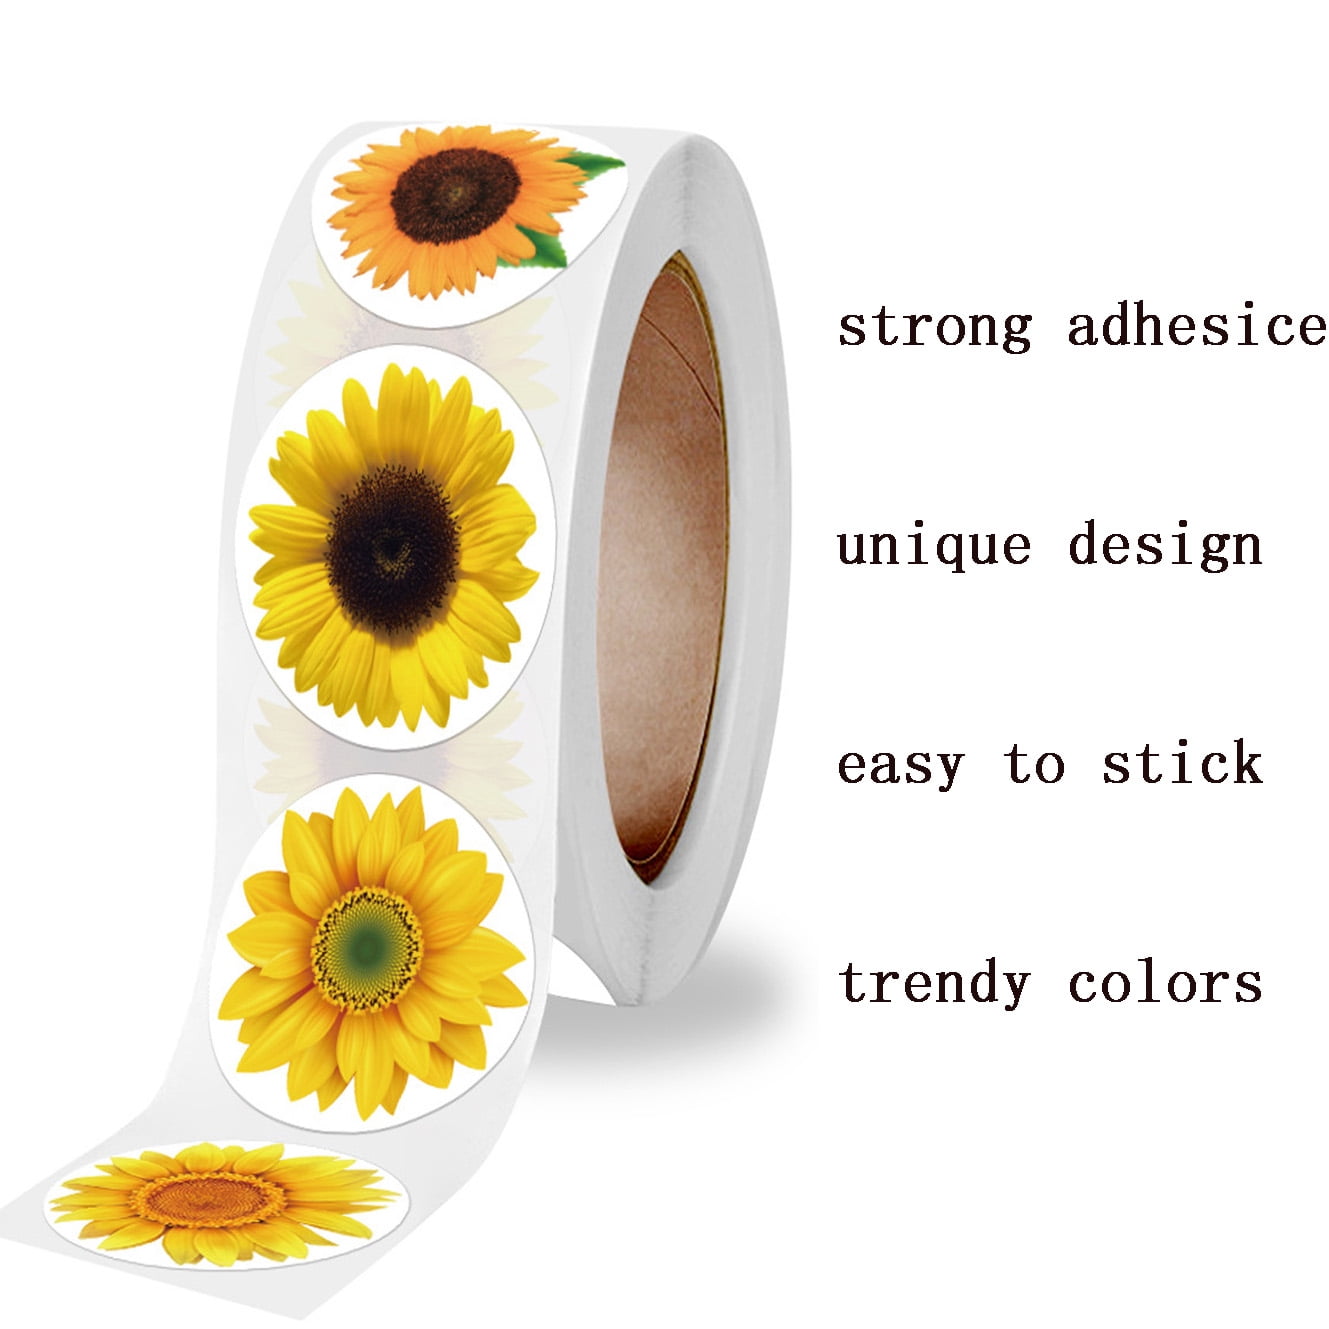 1" by 1.5" 50 Sunflower Envelope Seals Labels Stickers 